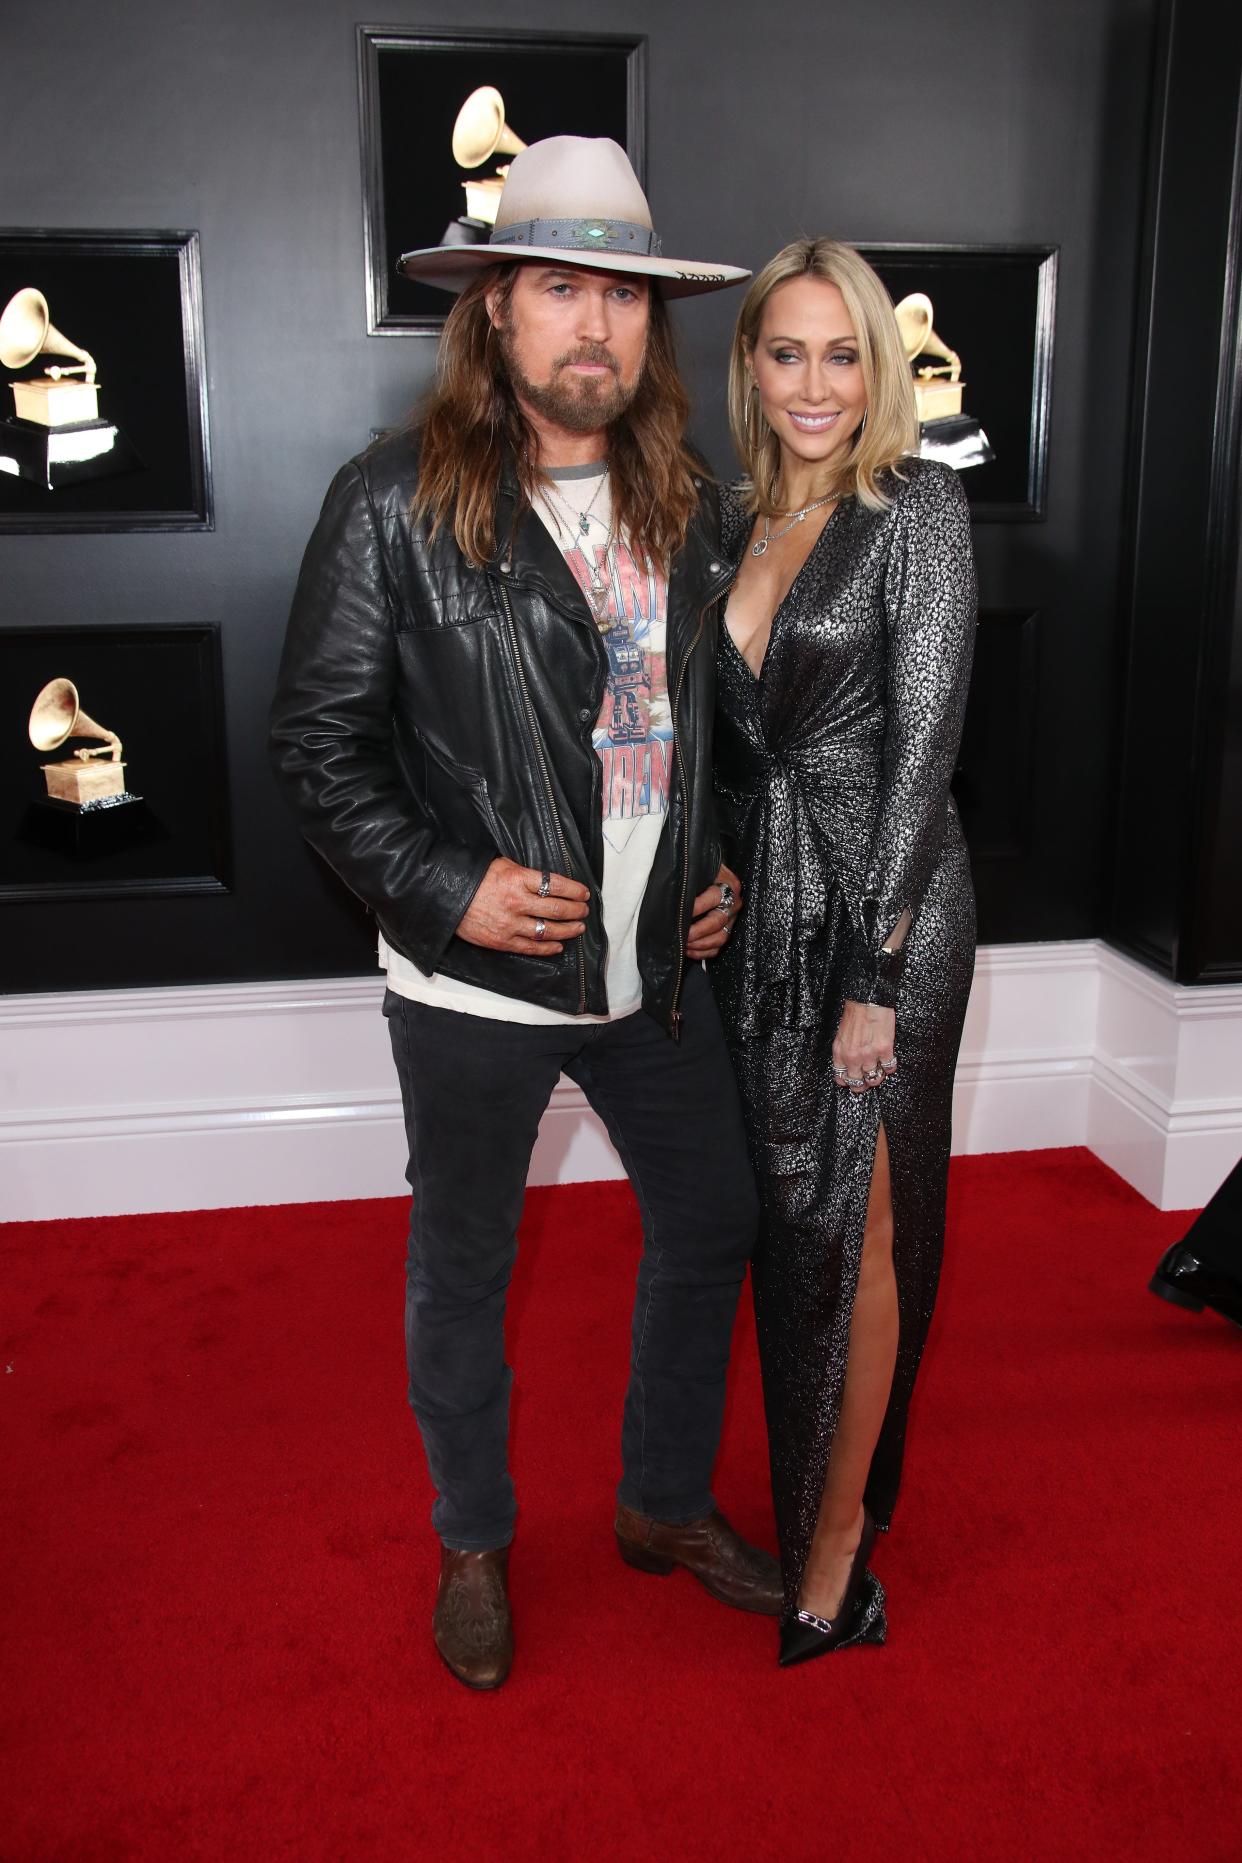 Billy Ray Cyrus and Tish Cyrus have been married for almost 30 years.